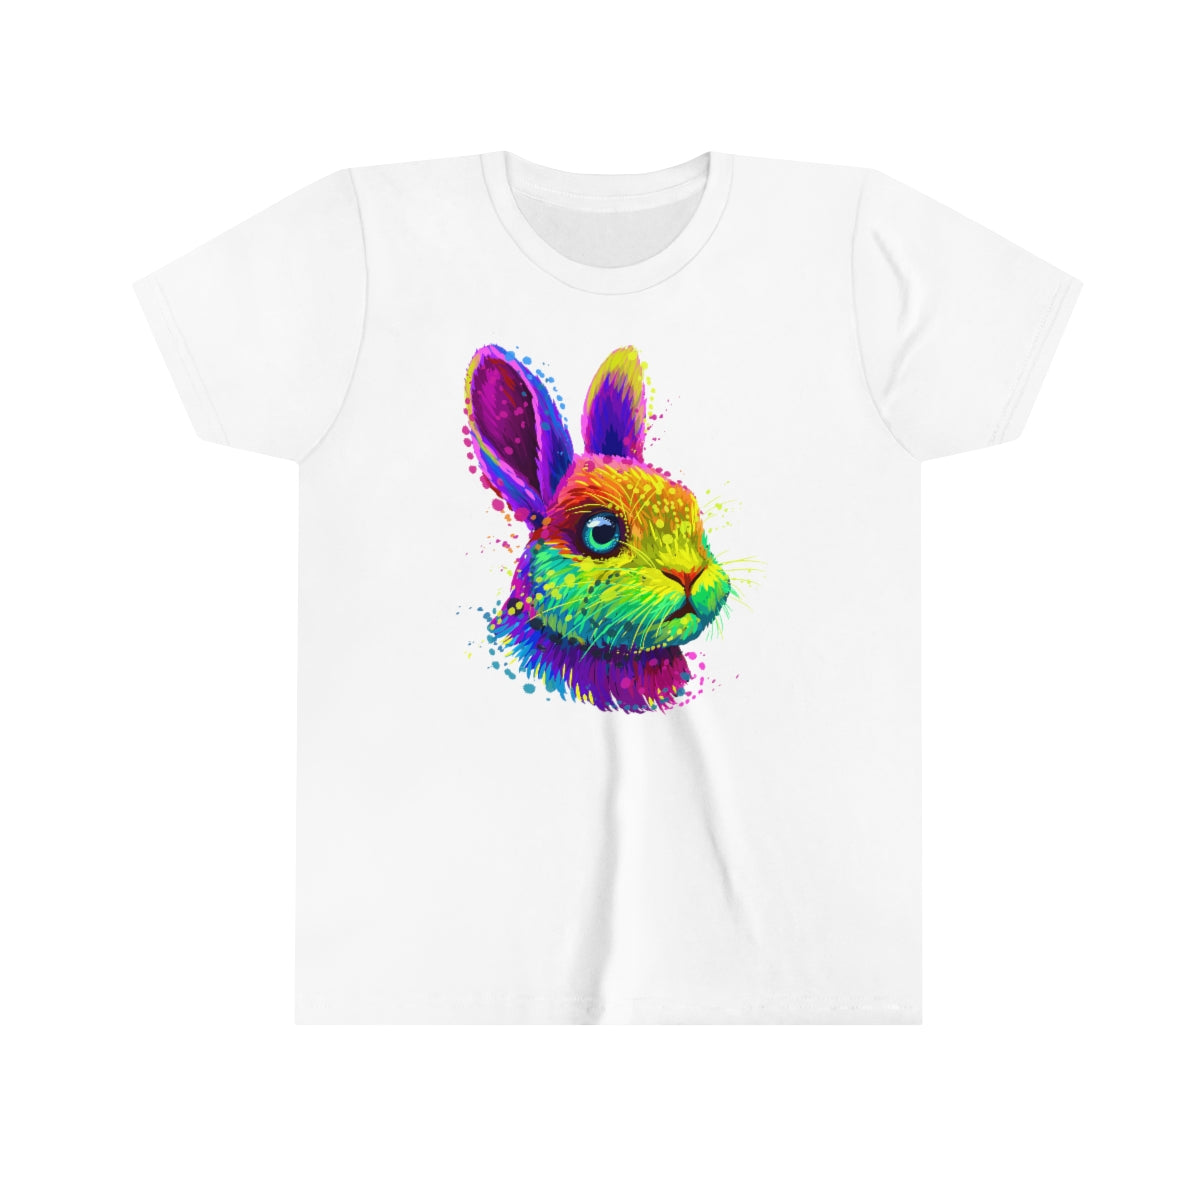 Youth Short Sleeve Tee "Abstract colorful little rabbit"